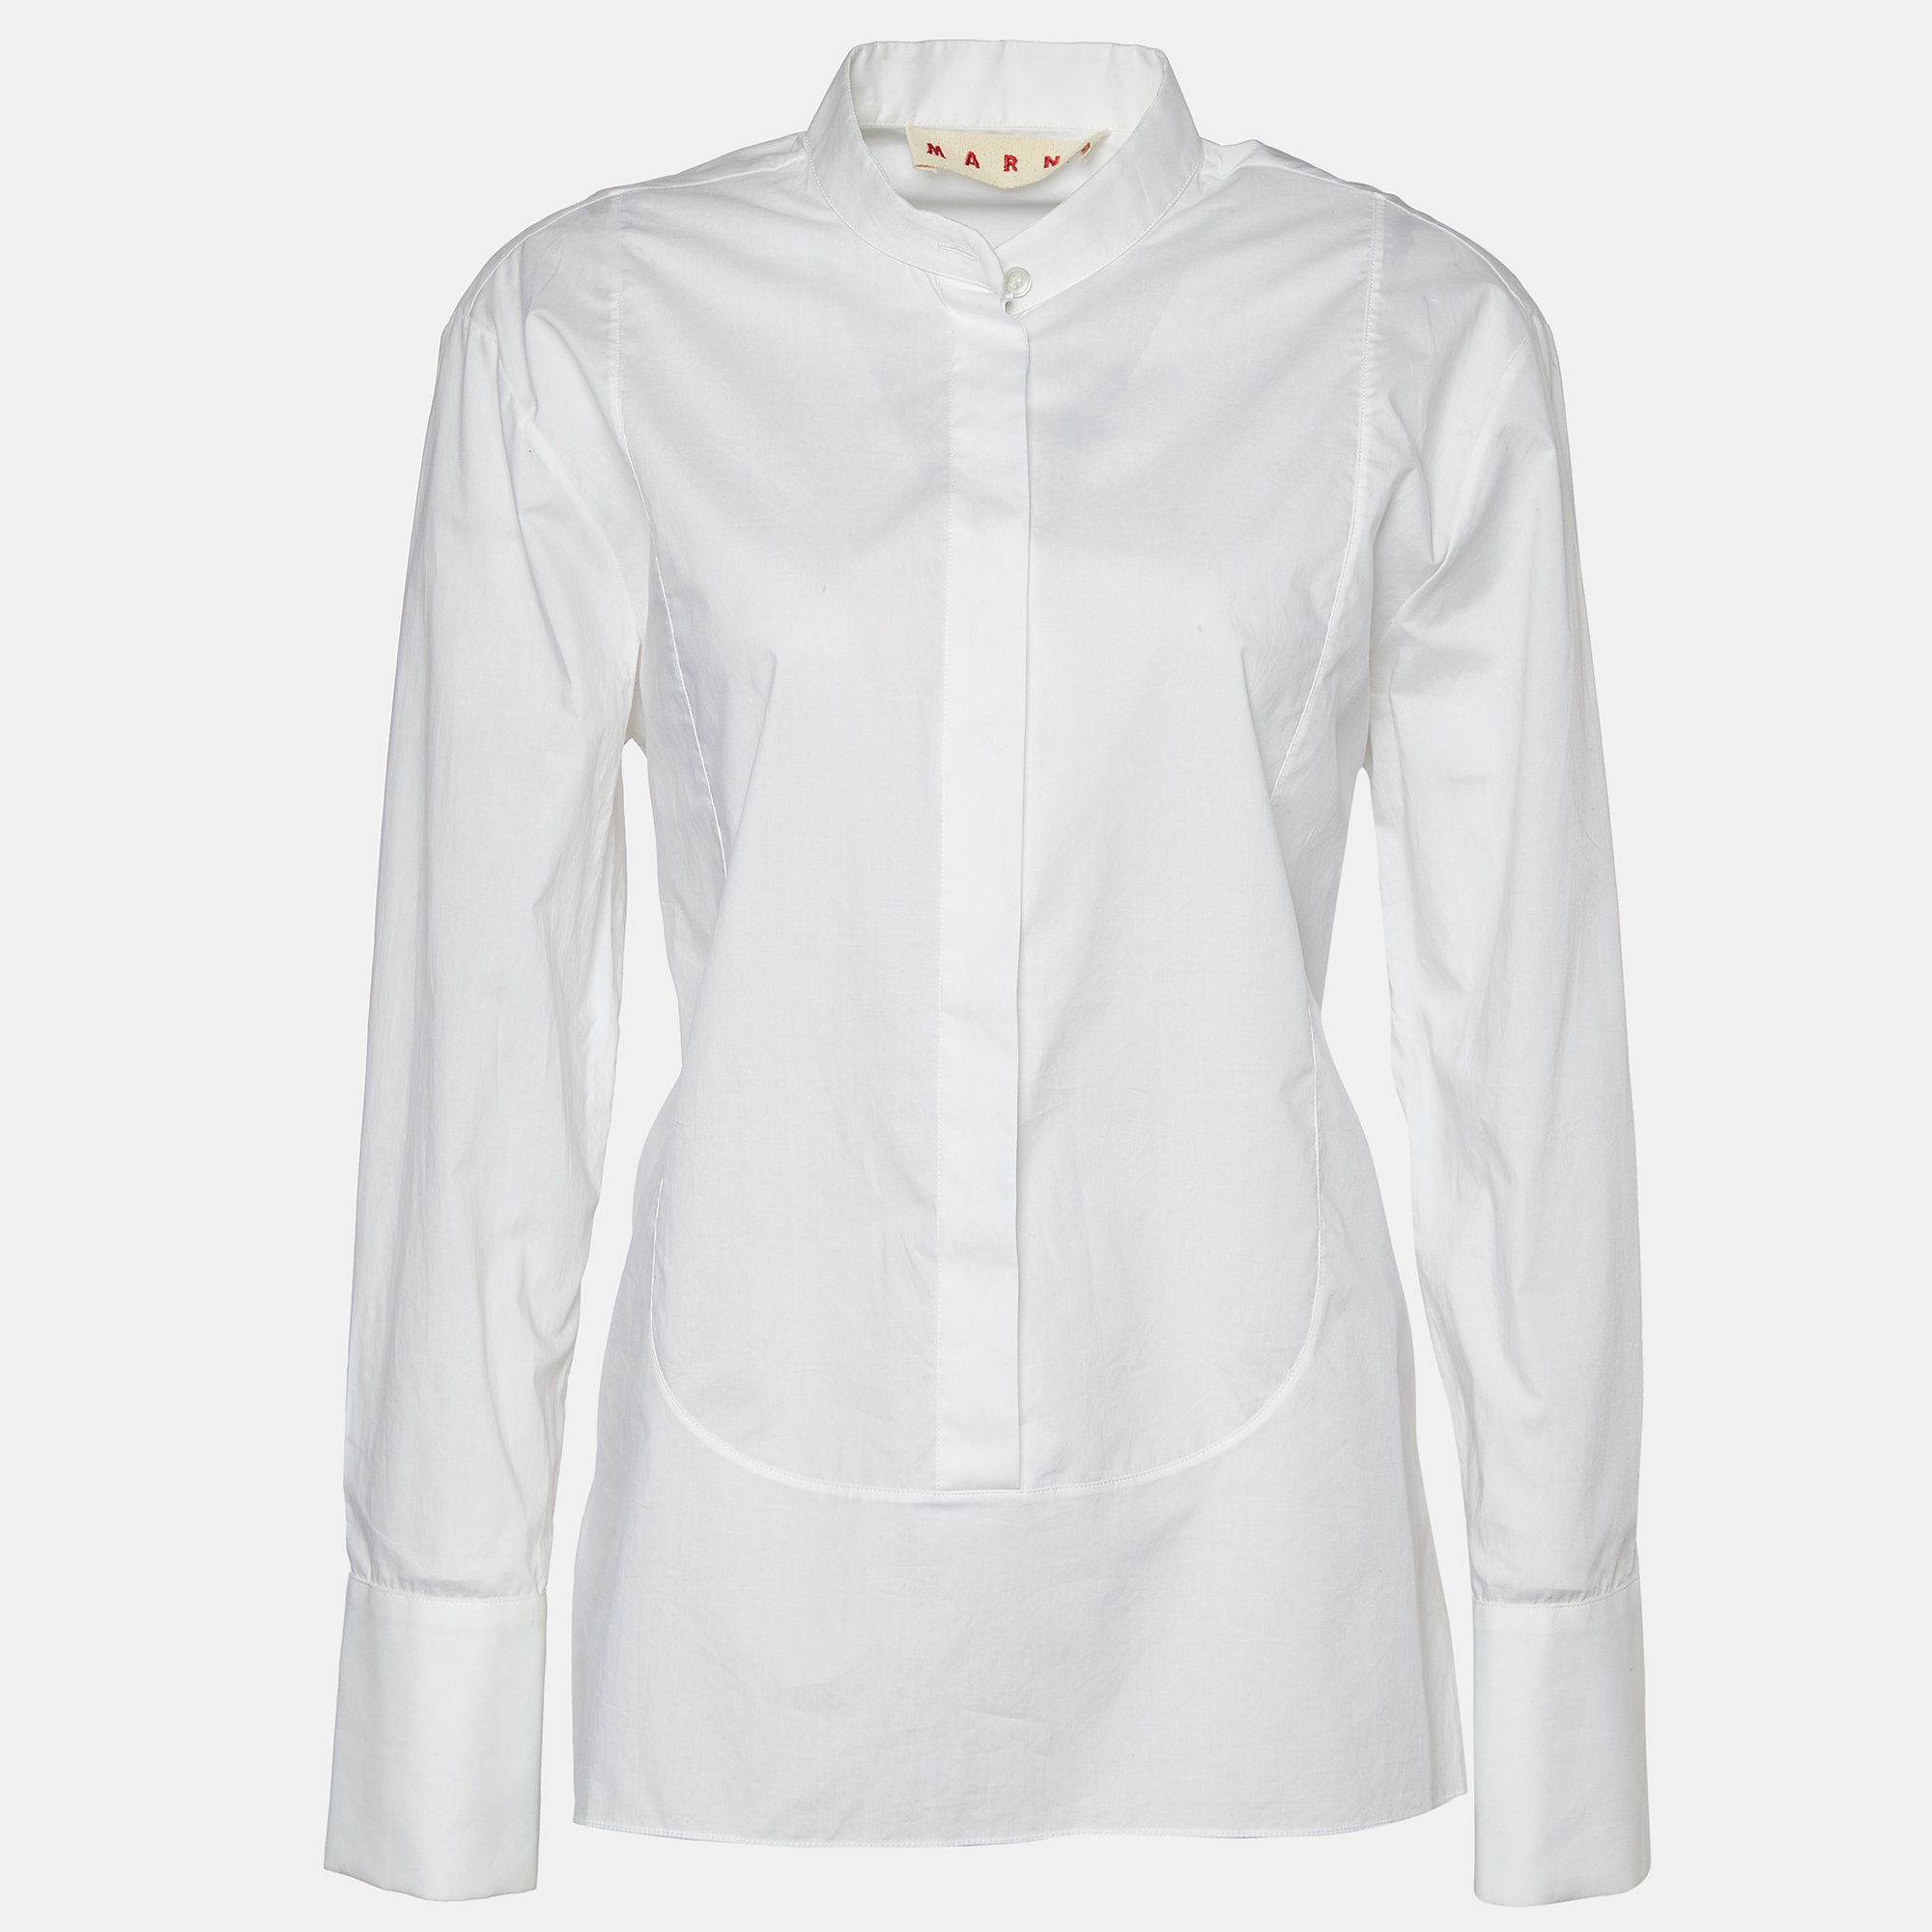 Marni White Cotton Long Sleeve Button Front Shirt S